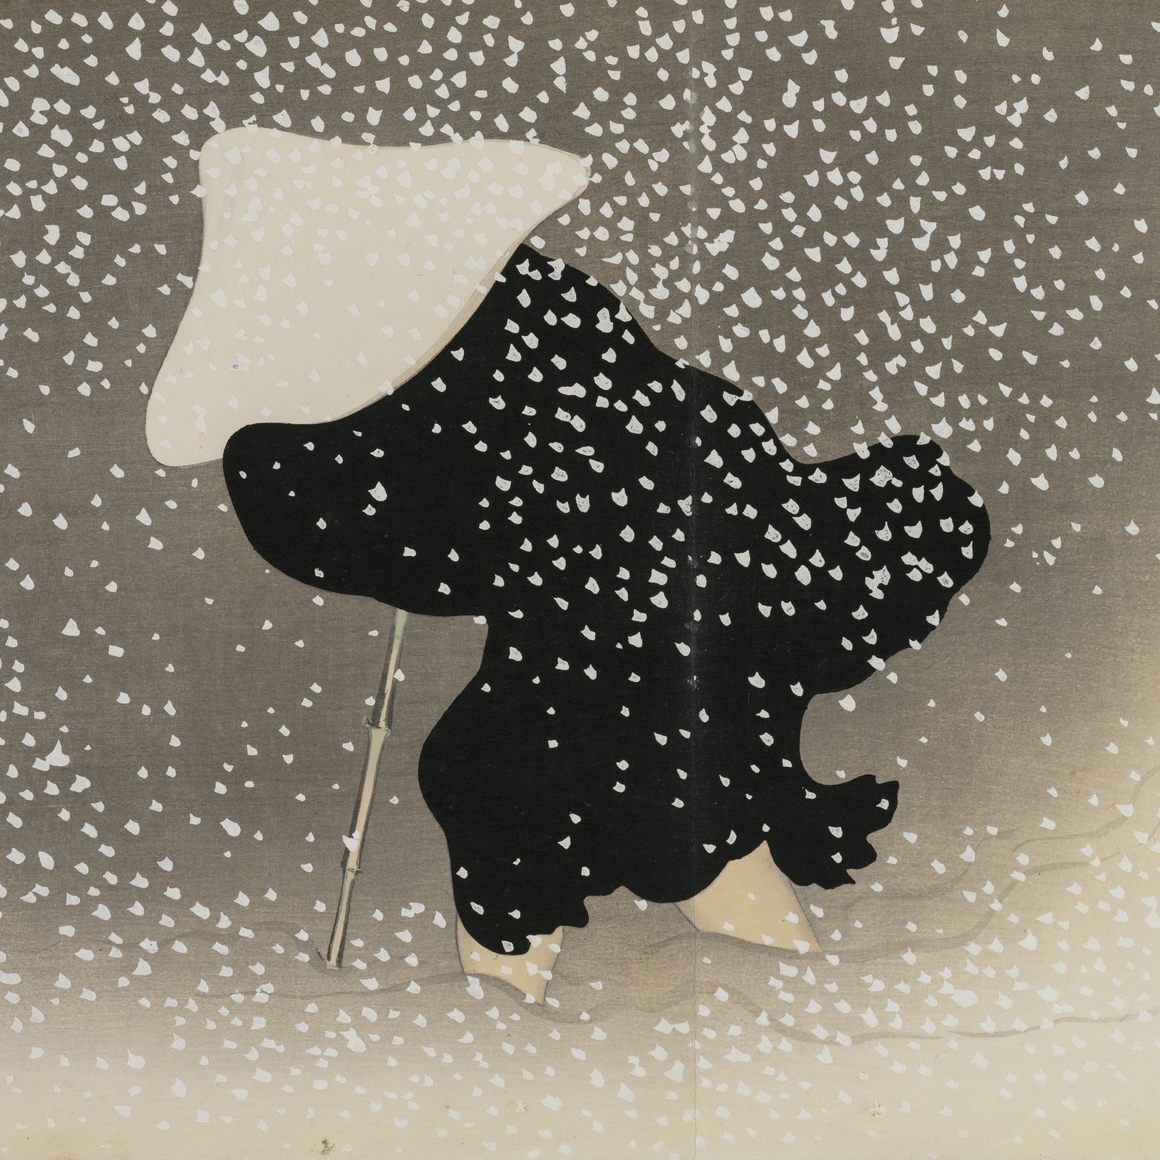 Kamisaka Sekka. Flowers of a Hundred Worlds: Swirling Snow, 1909–1910. Color woodcut with gold and silver. 11 3/4 x 8 11/16 in. (Collection of the Cleveland Museum of Art, Cleveland, OH.)